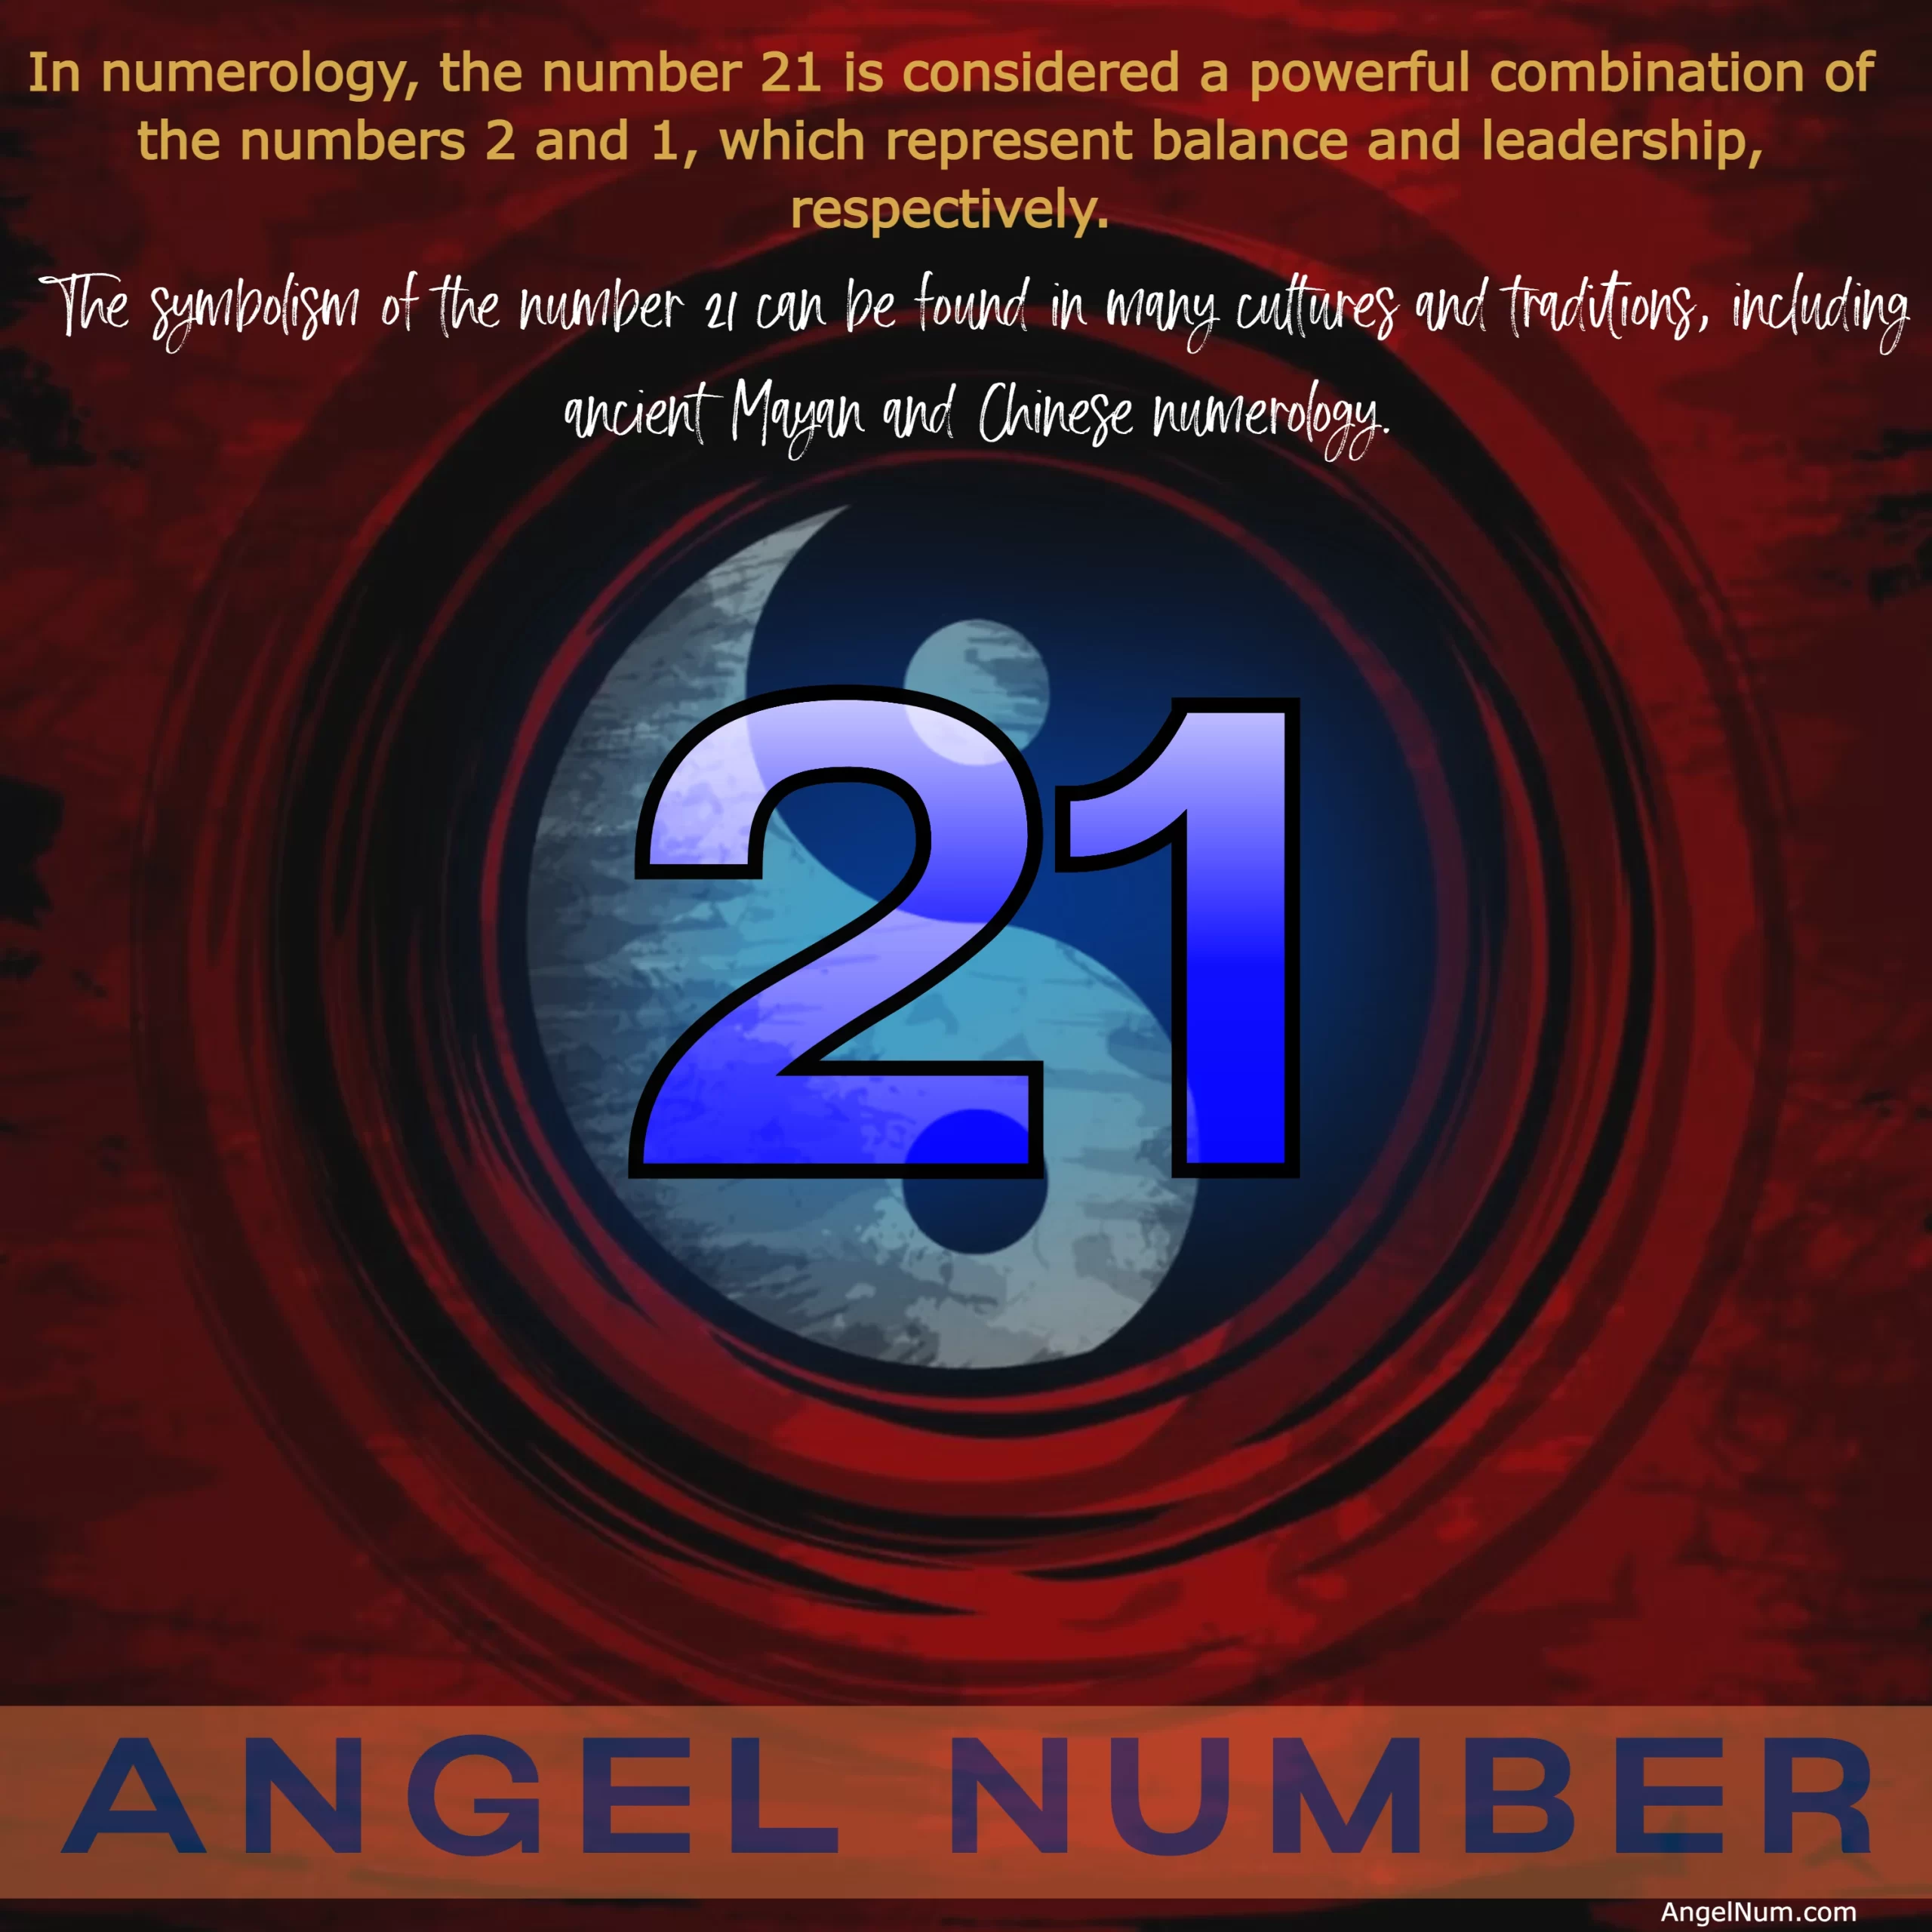 The Spiritual Meaning and Symbolism of Angel Number 21